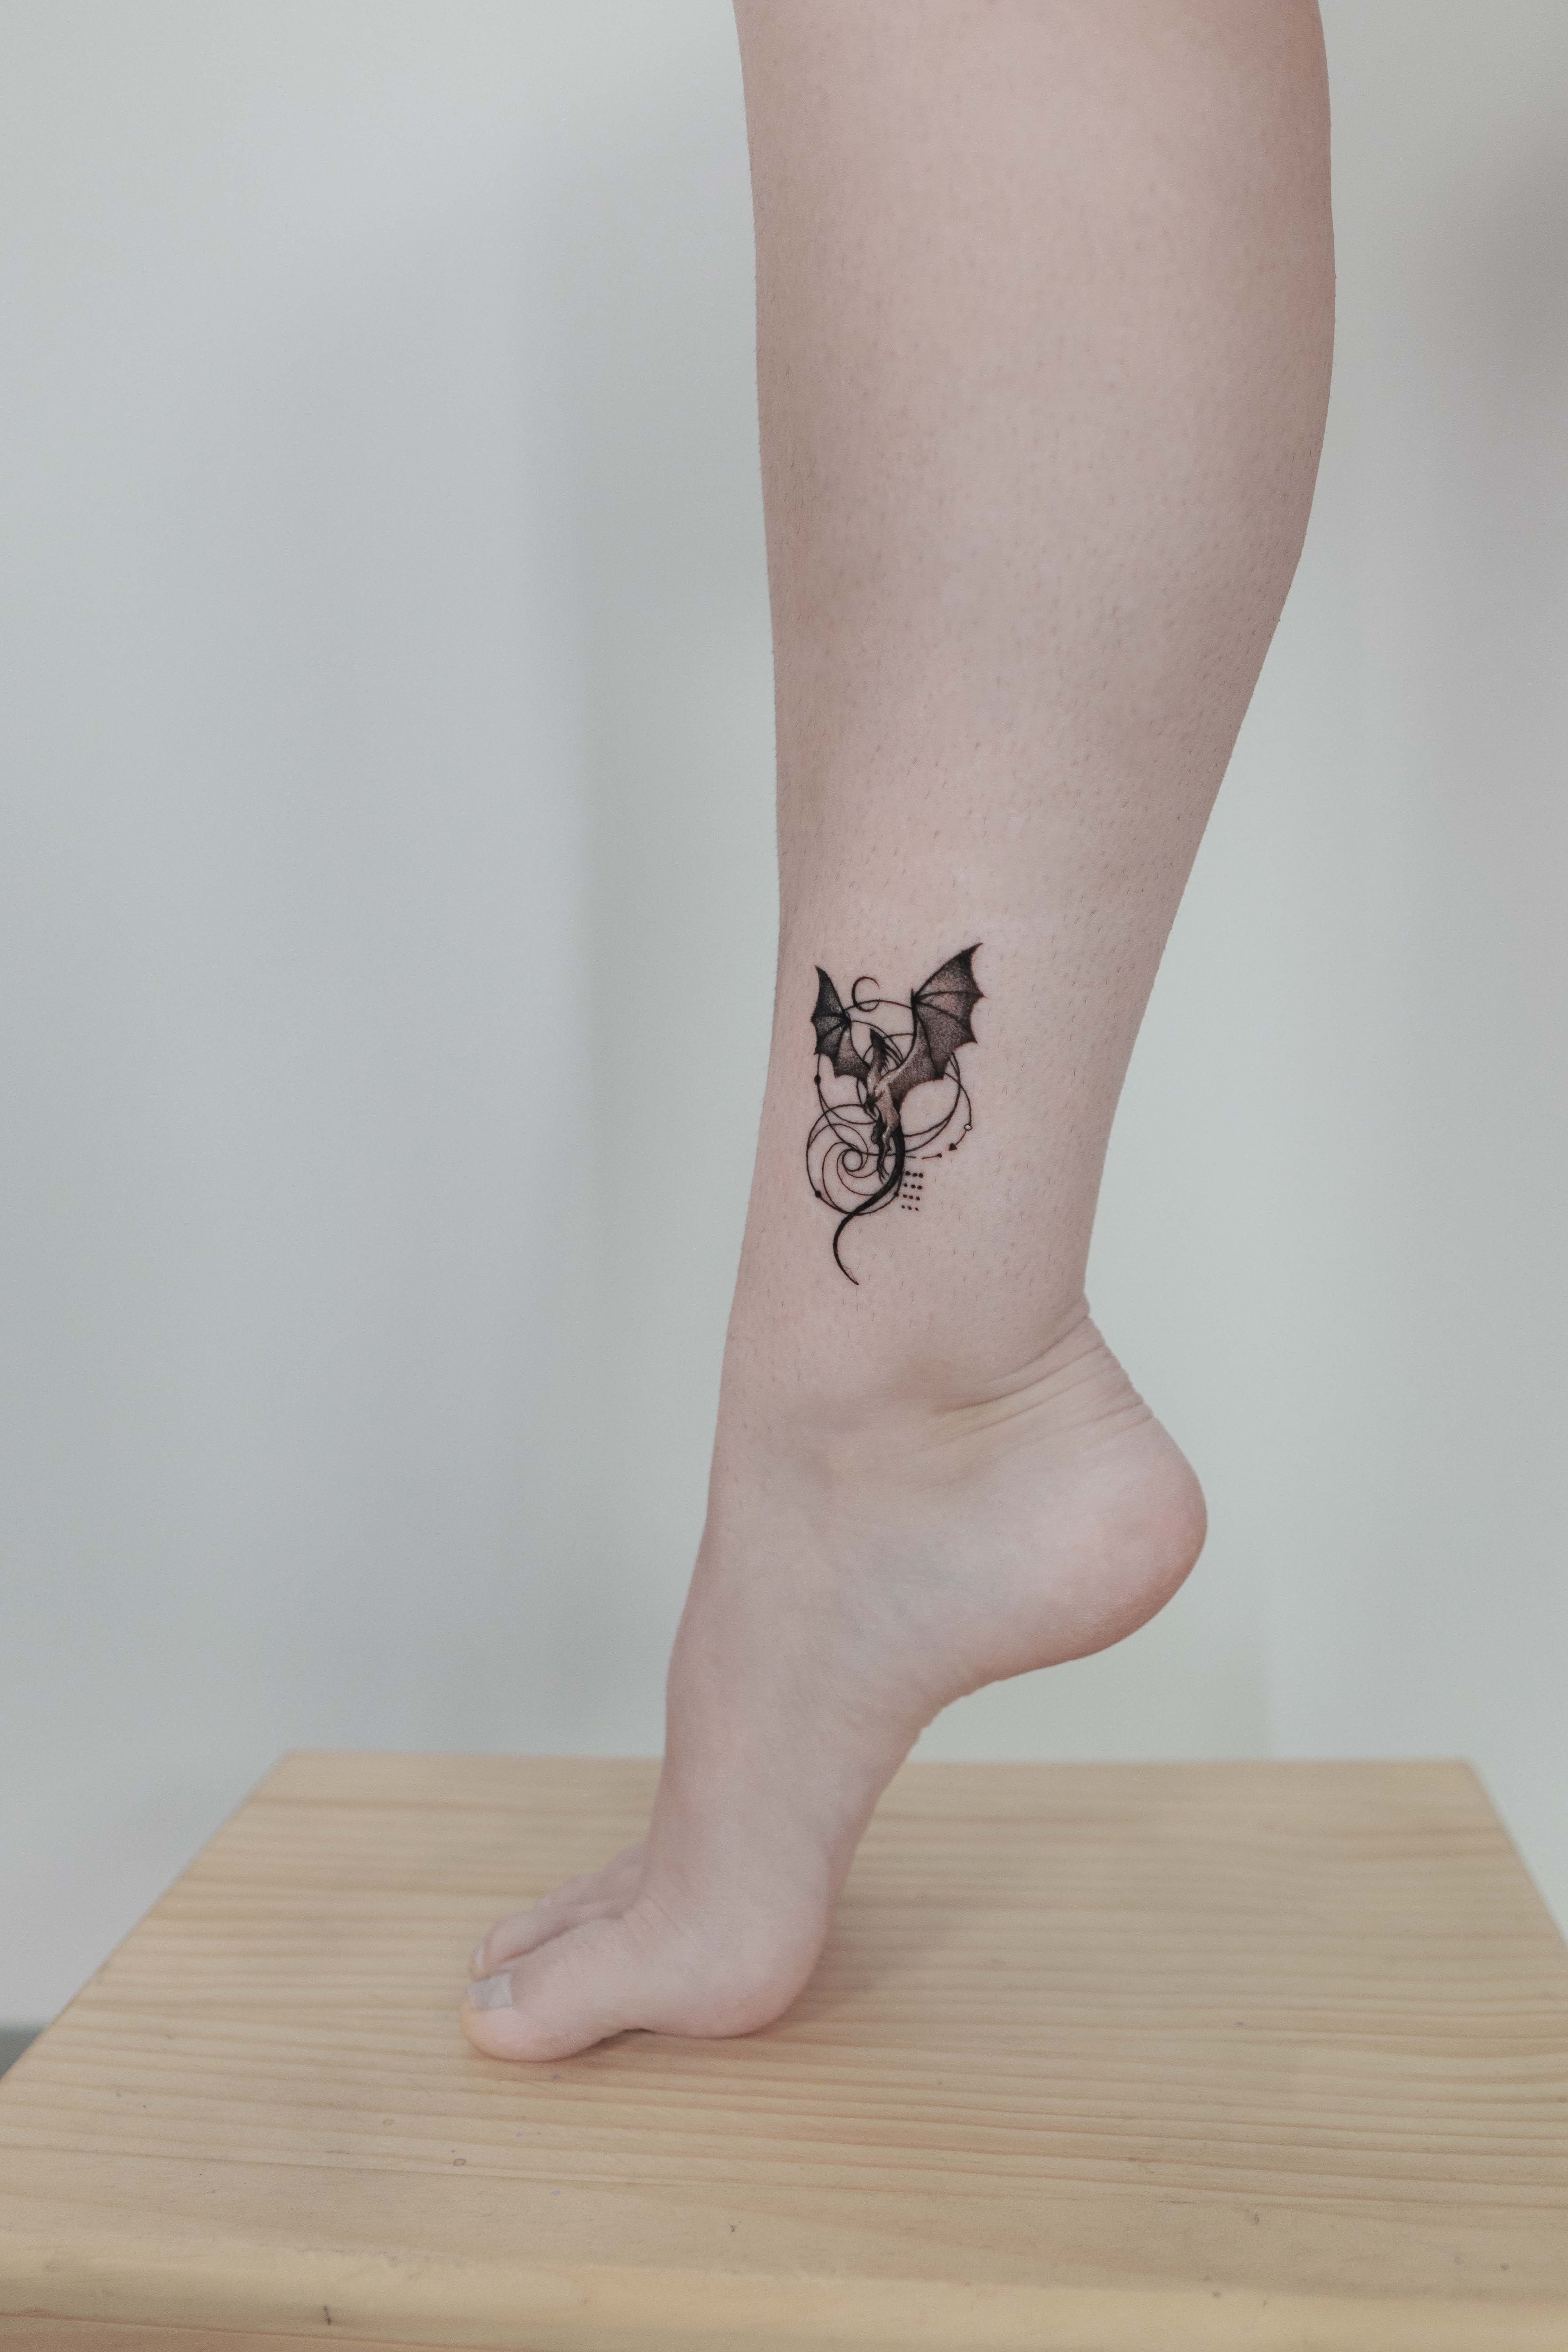 599 Cool Small Tattoos Royalty-Free Photos and Stock Images | Shutterstock